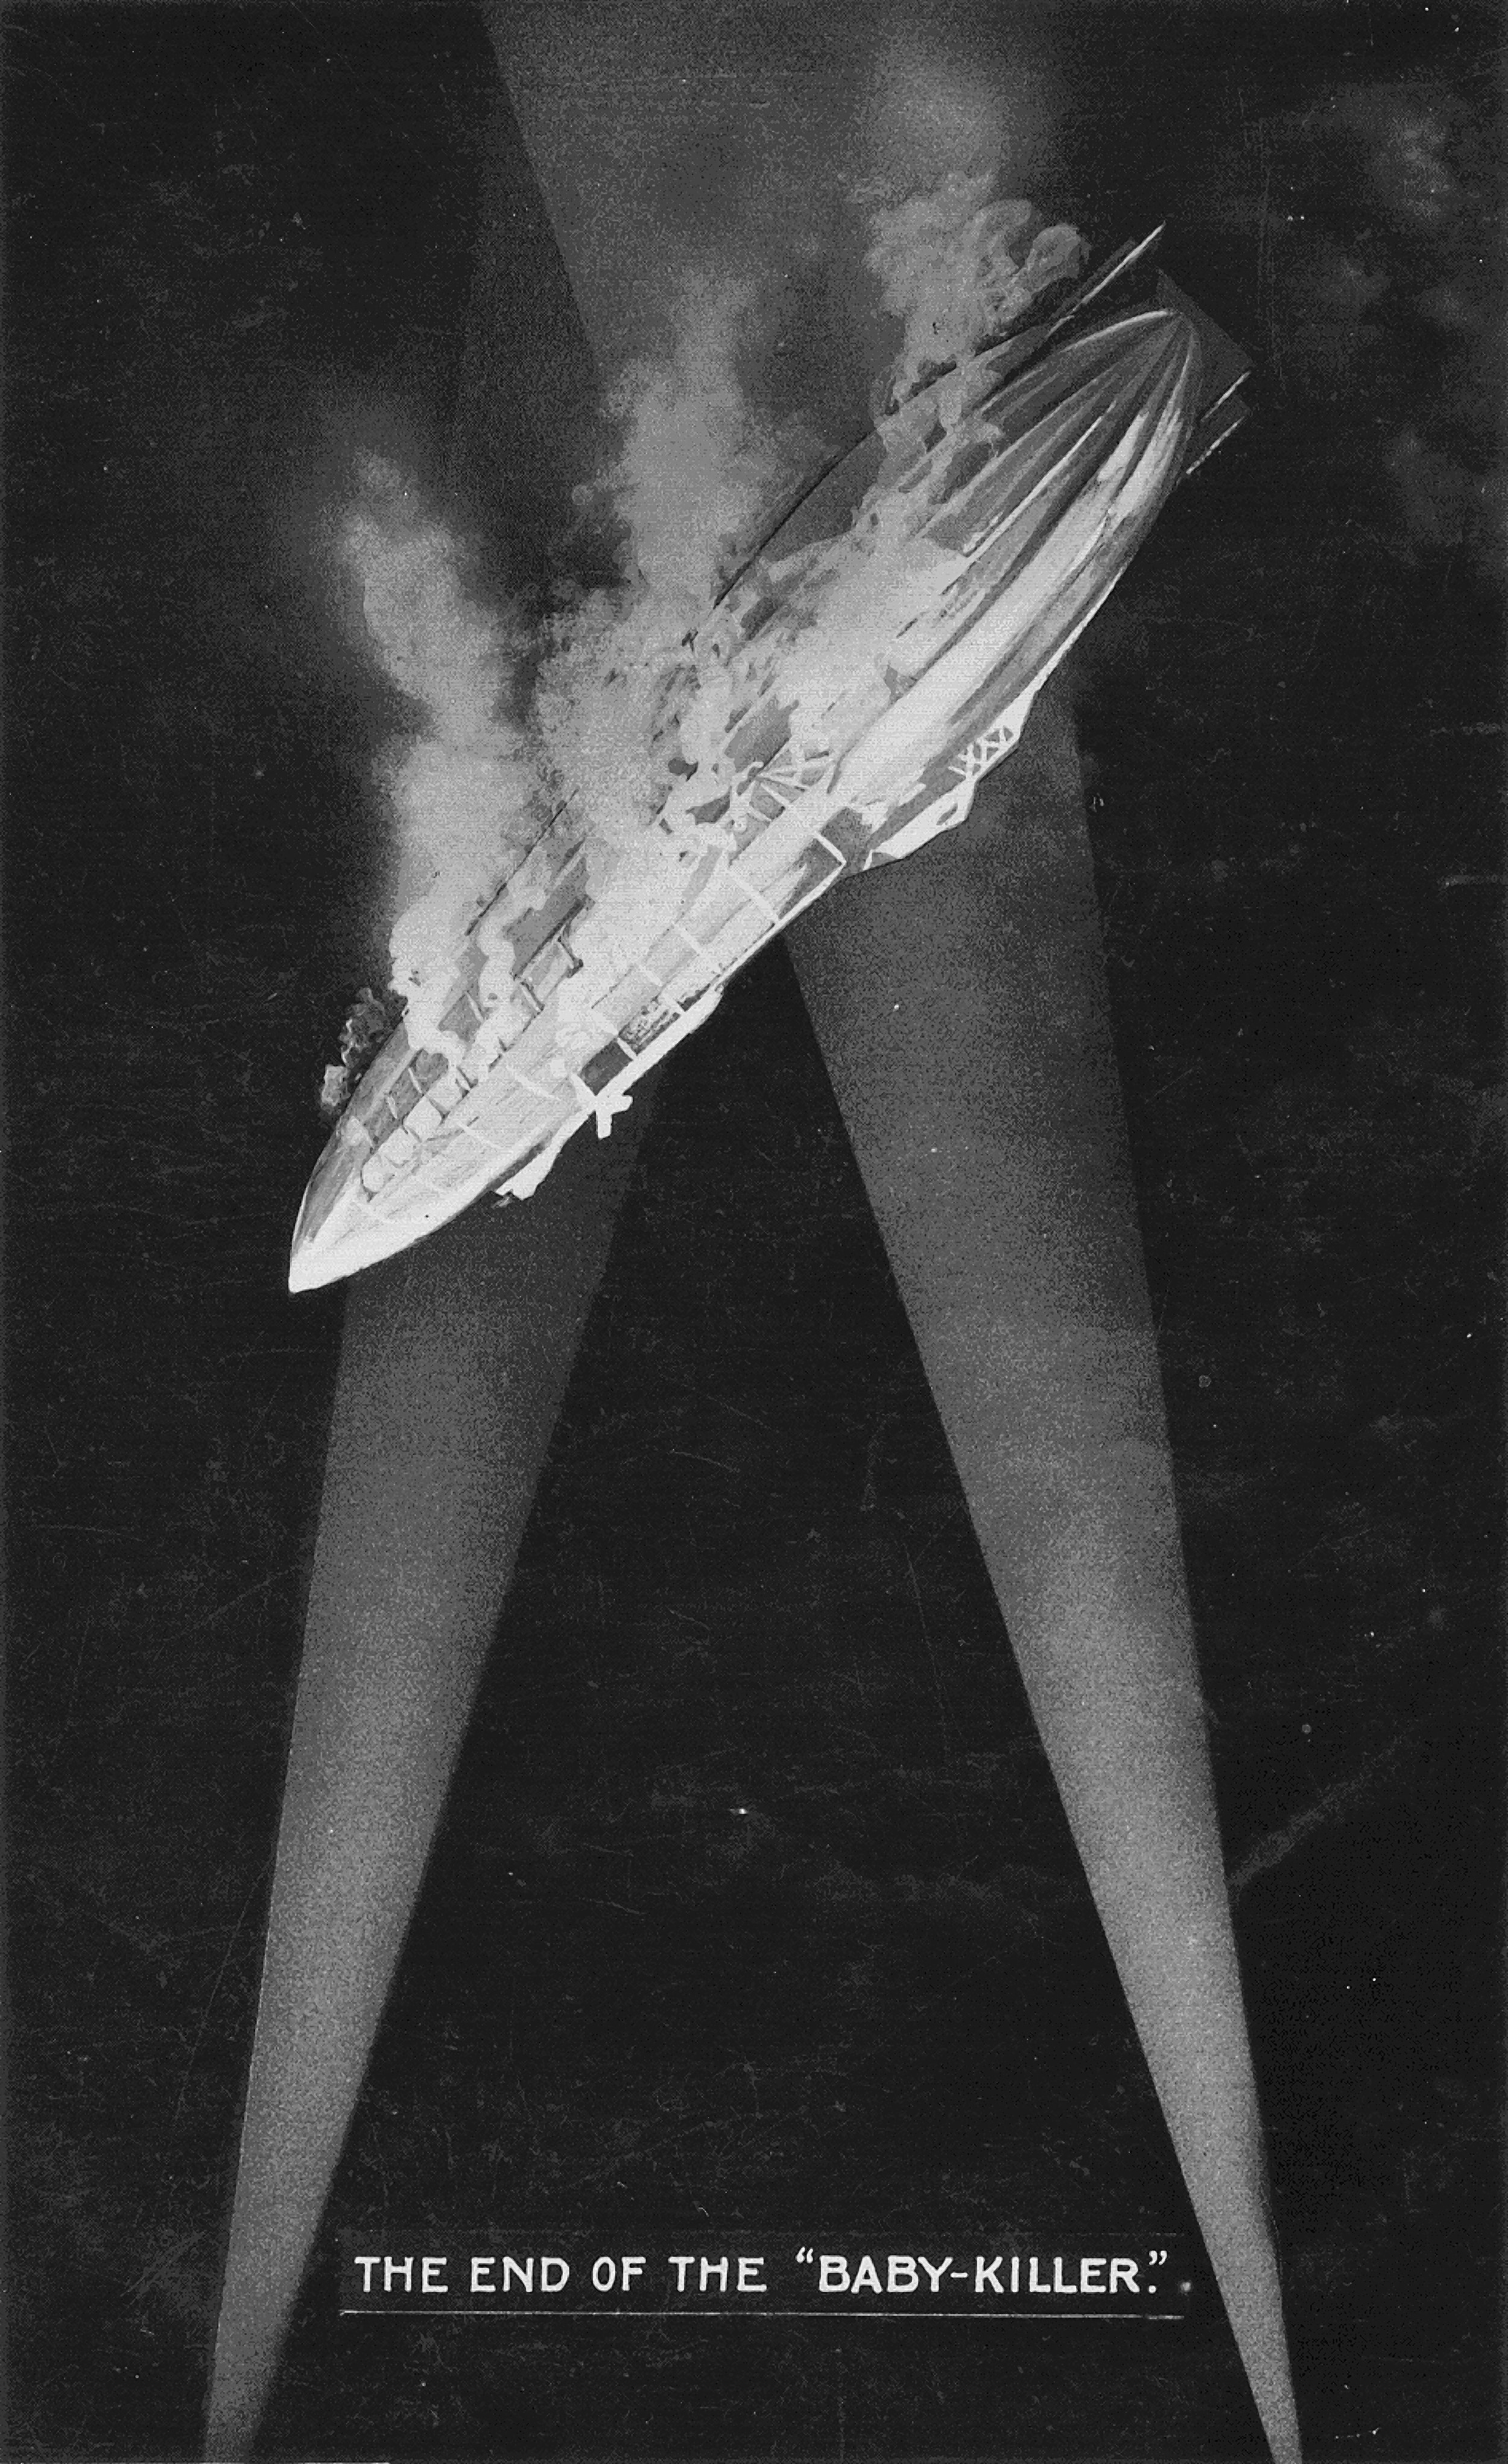 A World War One poster showing a zeppelin in flames